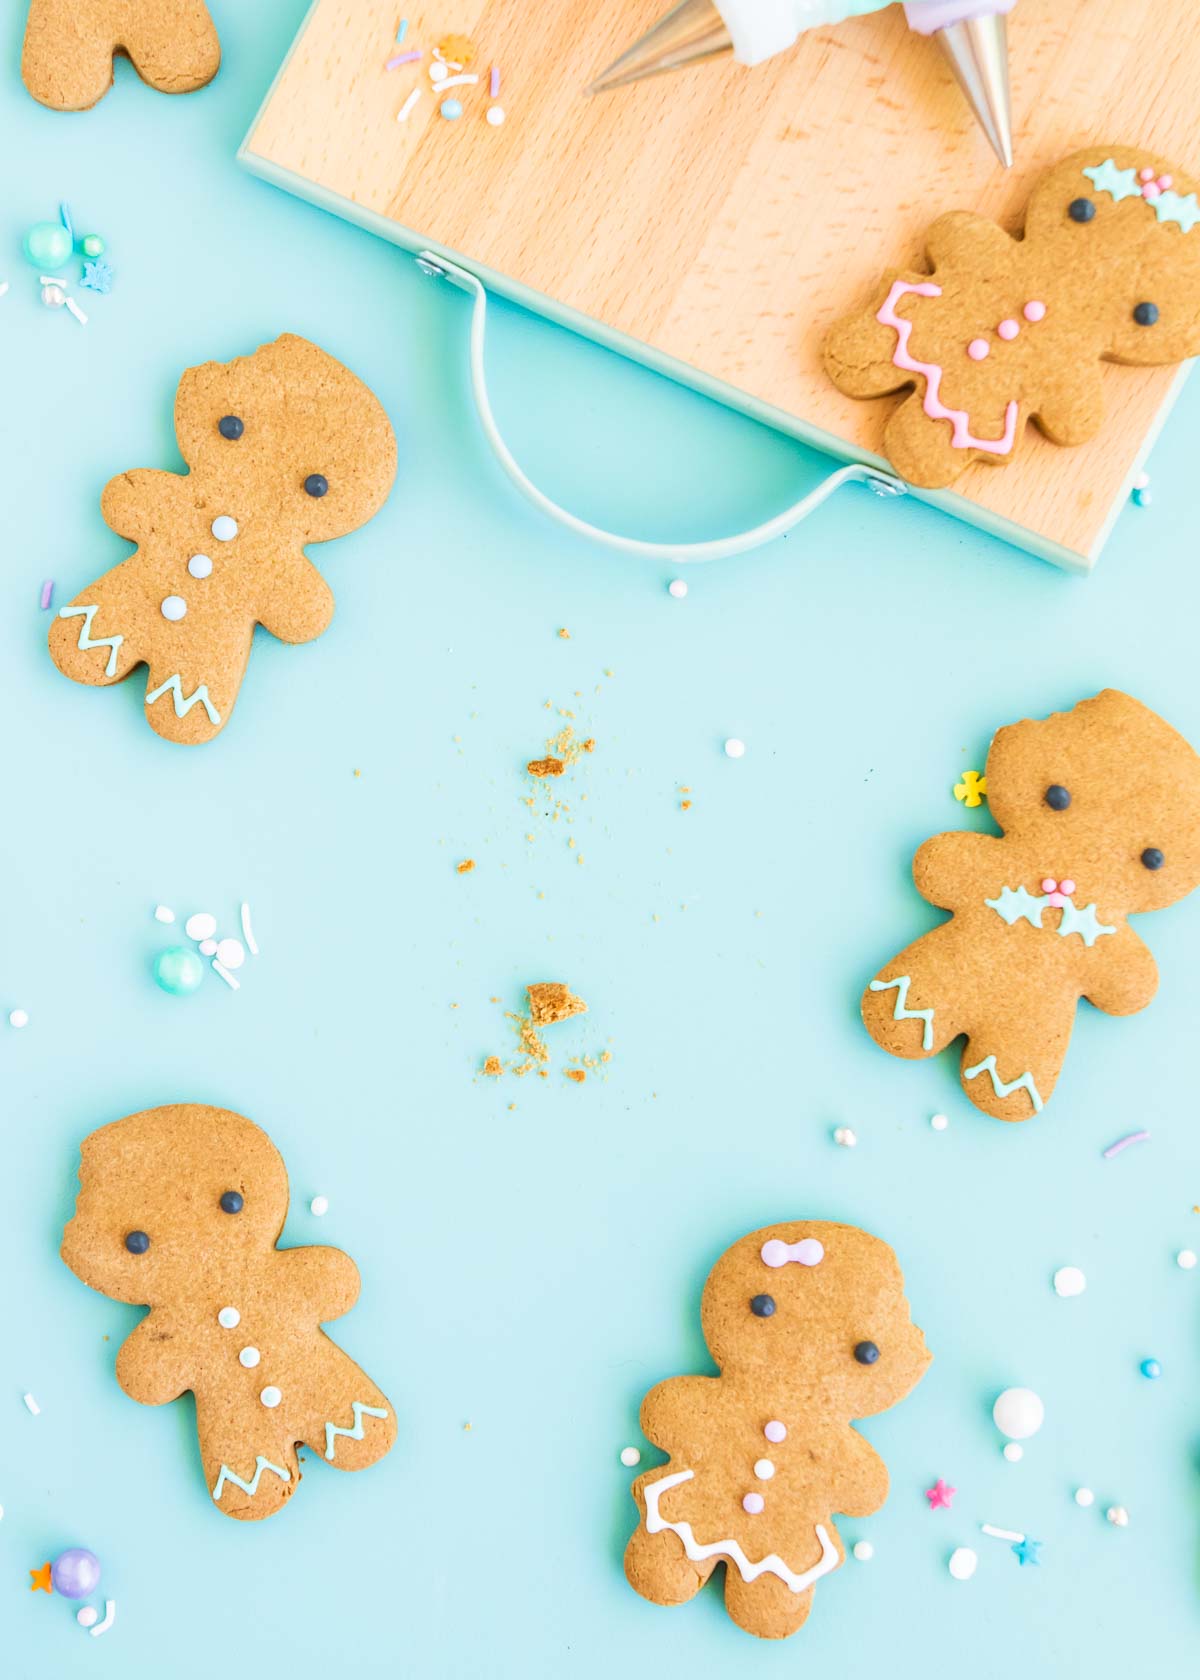 Gluten free gingerbread cookies with one missing and crumbs in its place.